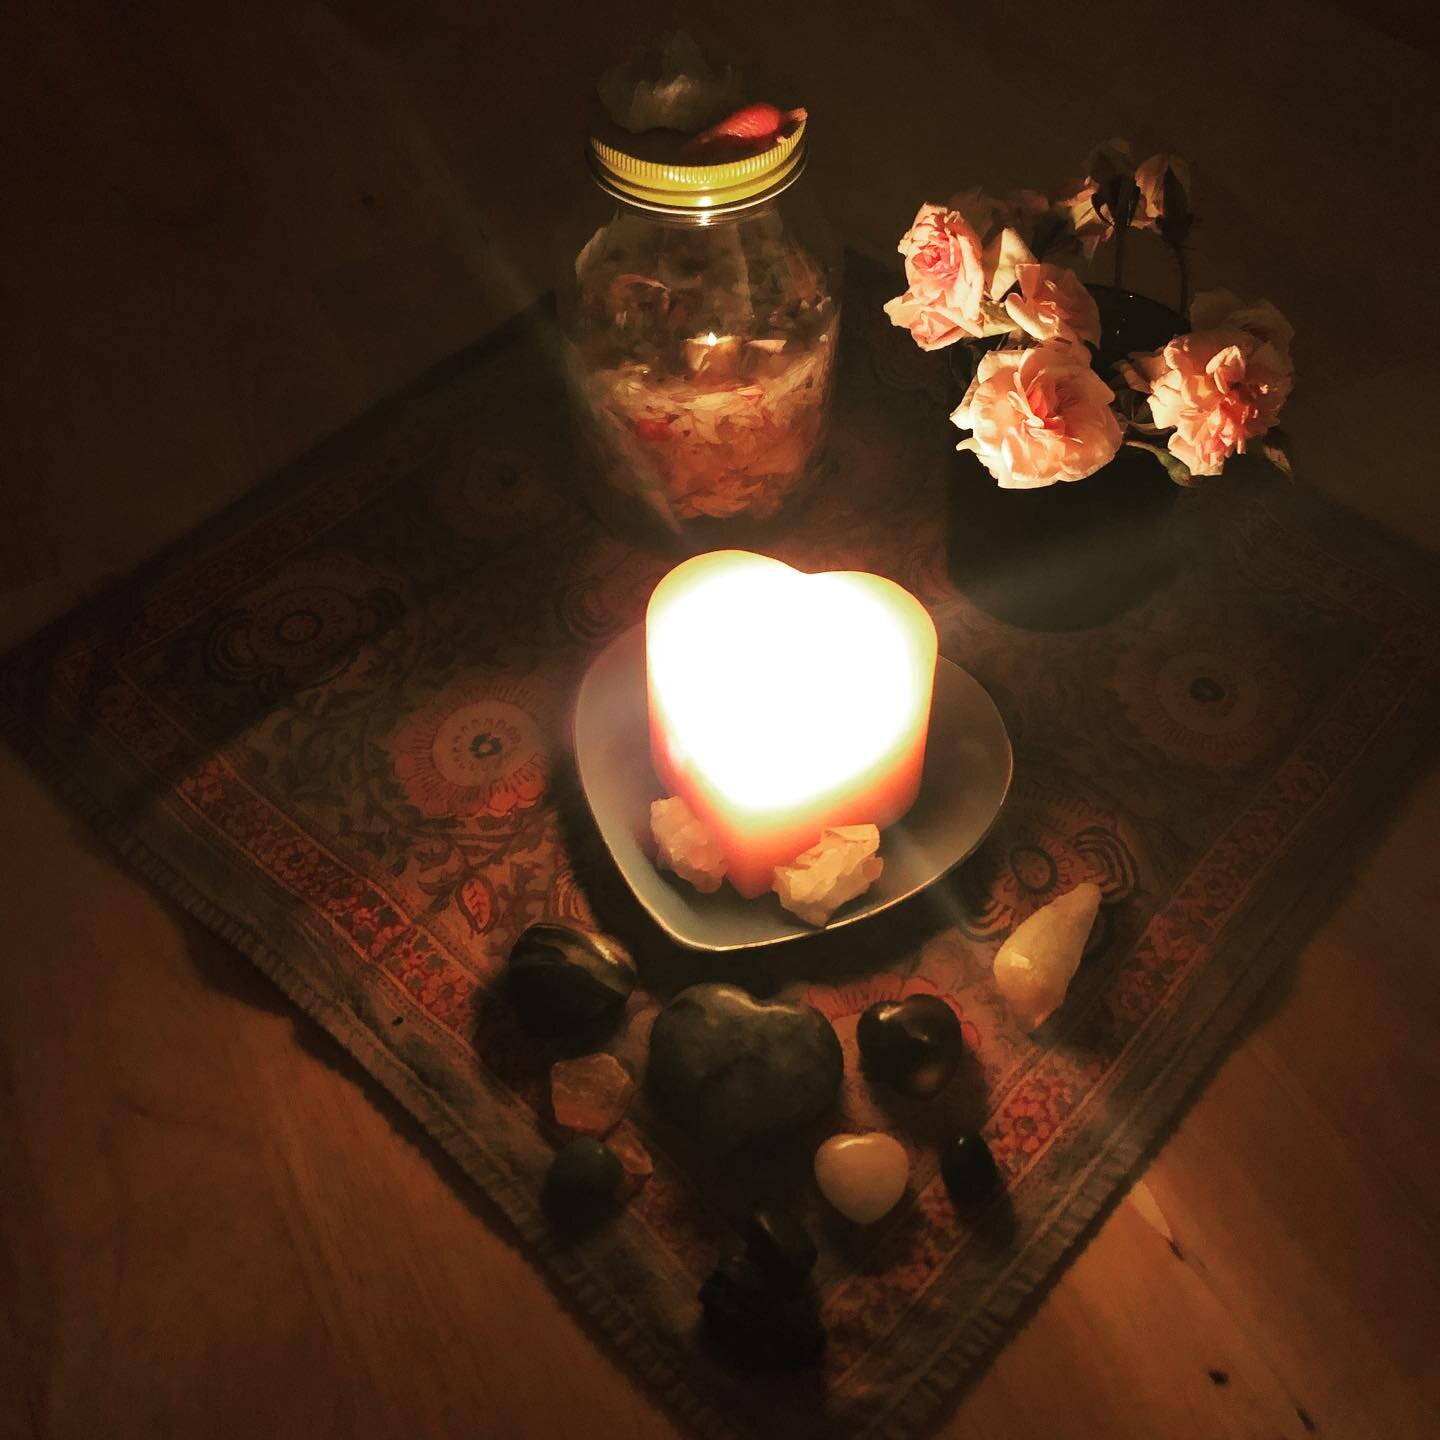 ✨🤲🏻🥀🌈🕯🎸🕯🌈🥀🤲🏻✨Intentional potions for special occasions, infused with sweet remembrances. Happy Birthday Dad, wherever your great Spirit may roam. 🤲🏻 #ancestor #gratitude #rosepetals #infusions #lovesteep